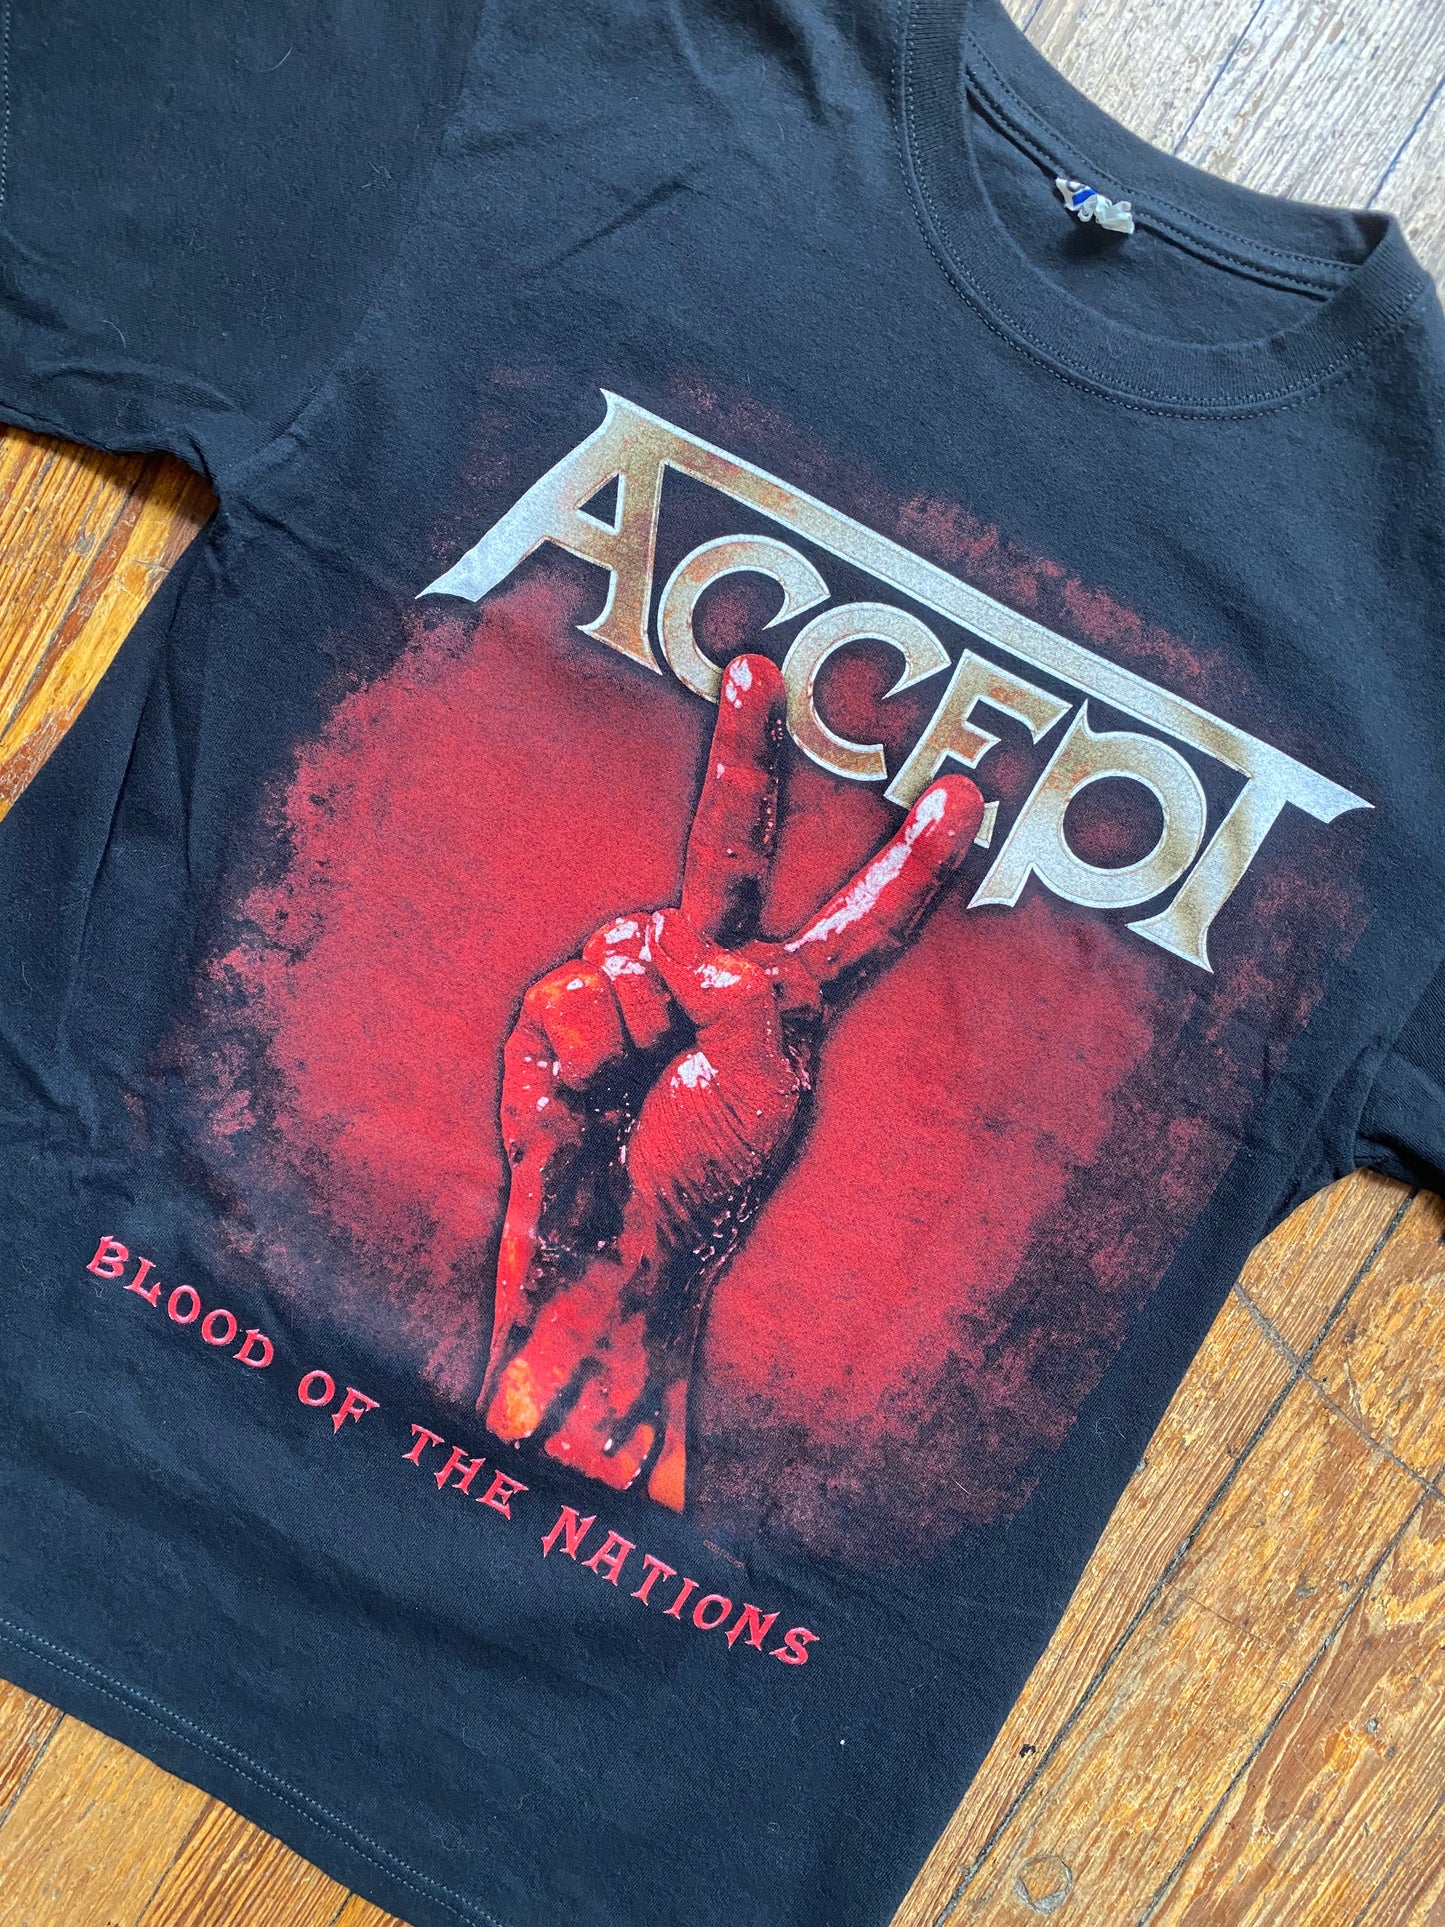 Accept “Blood of the Nations” 2011 Tour Shirt